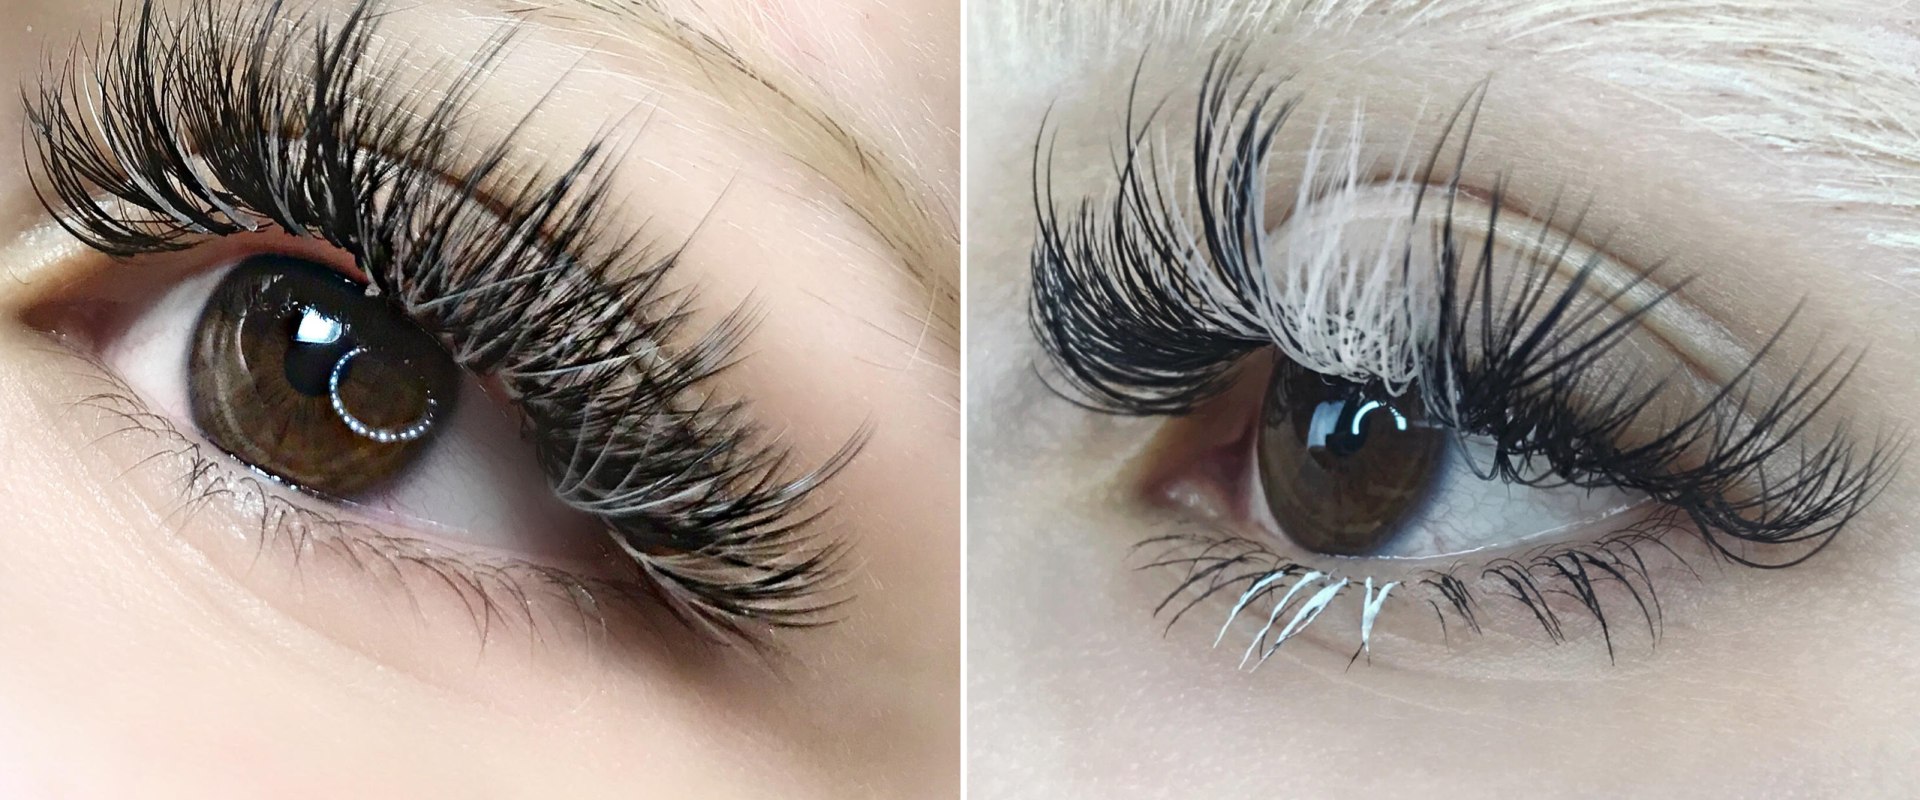 Are Eyelash Extensions Made from Real Hair?